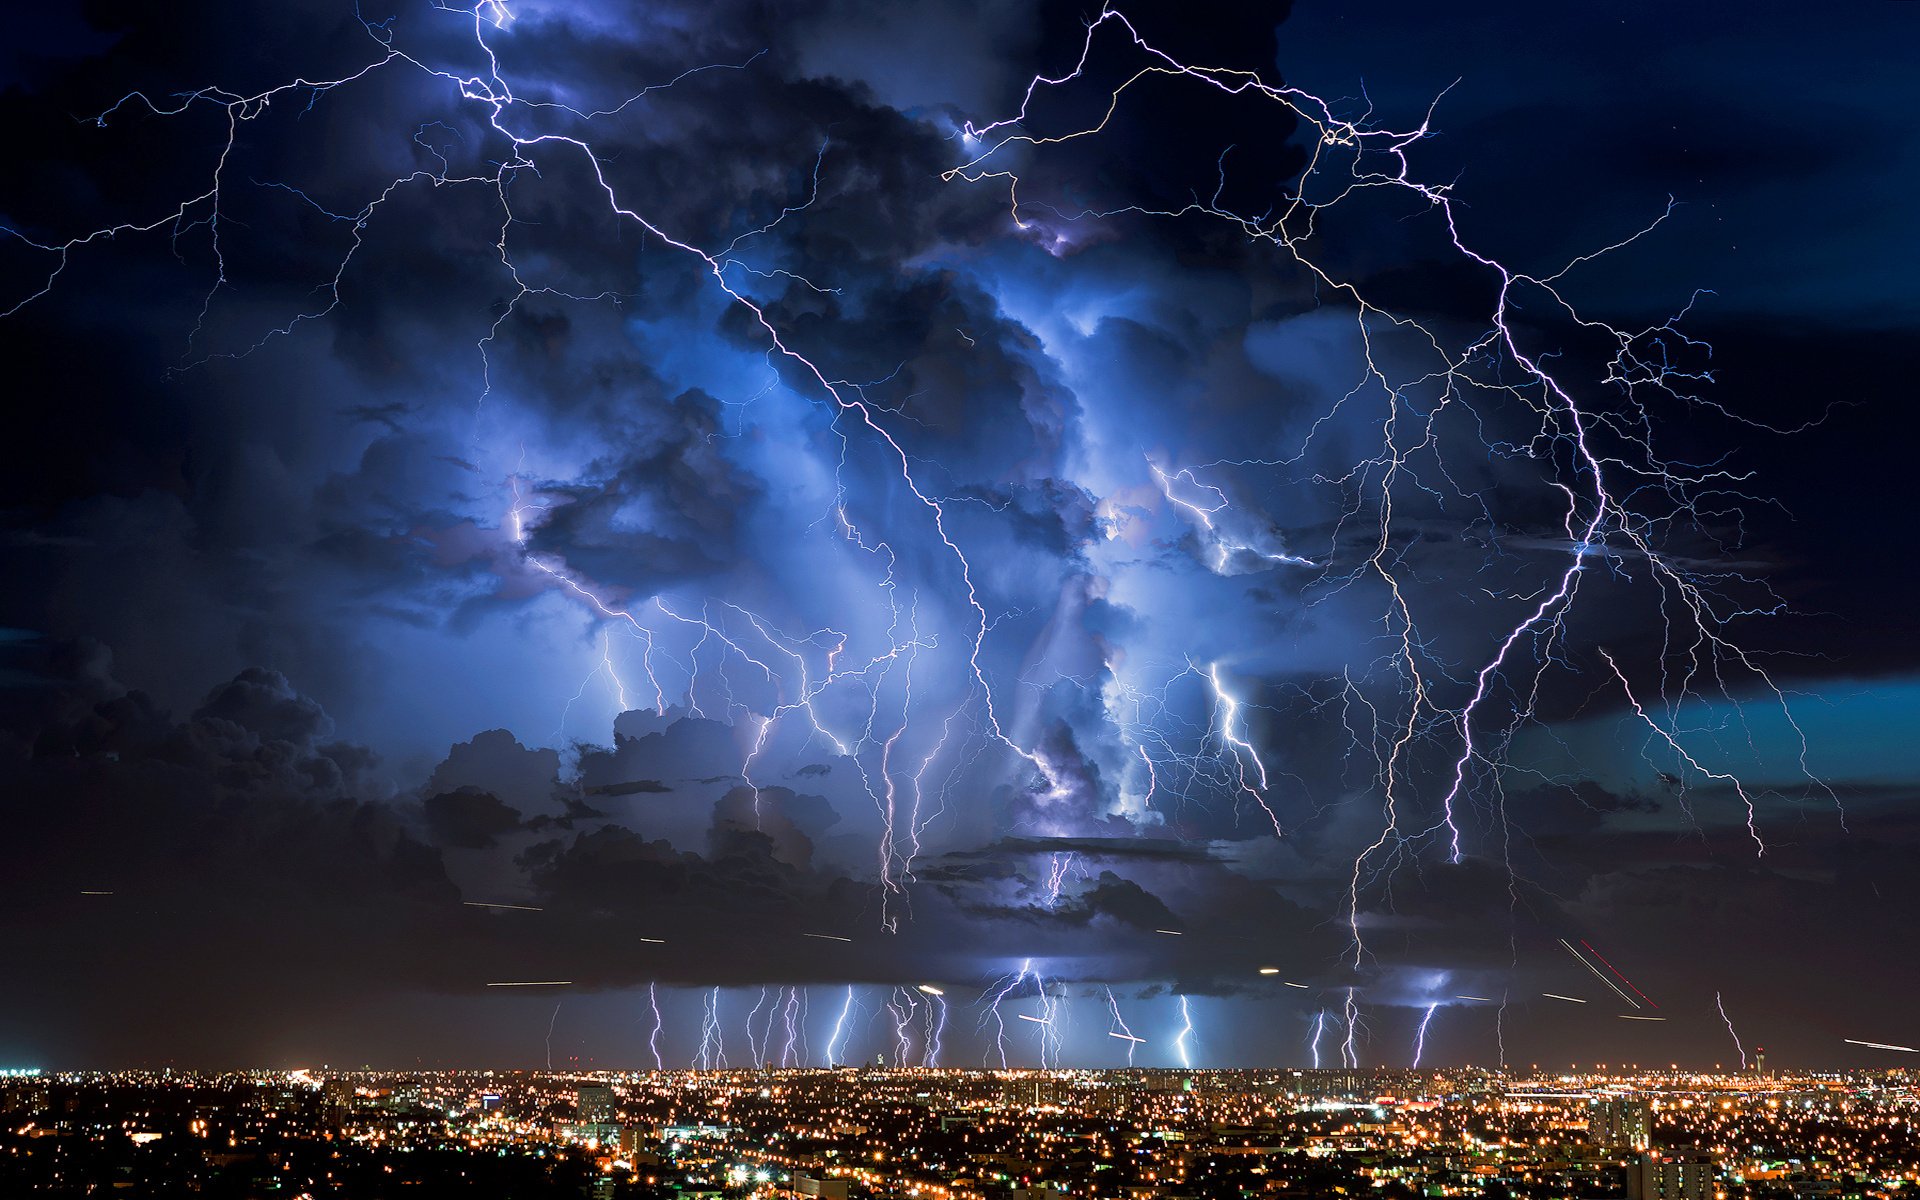 Lightning Background Images HD Pictures and Wallpaper For Free Download   Pngtree